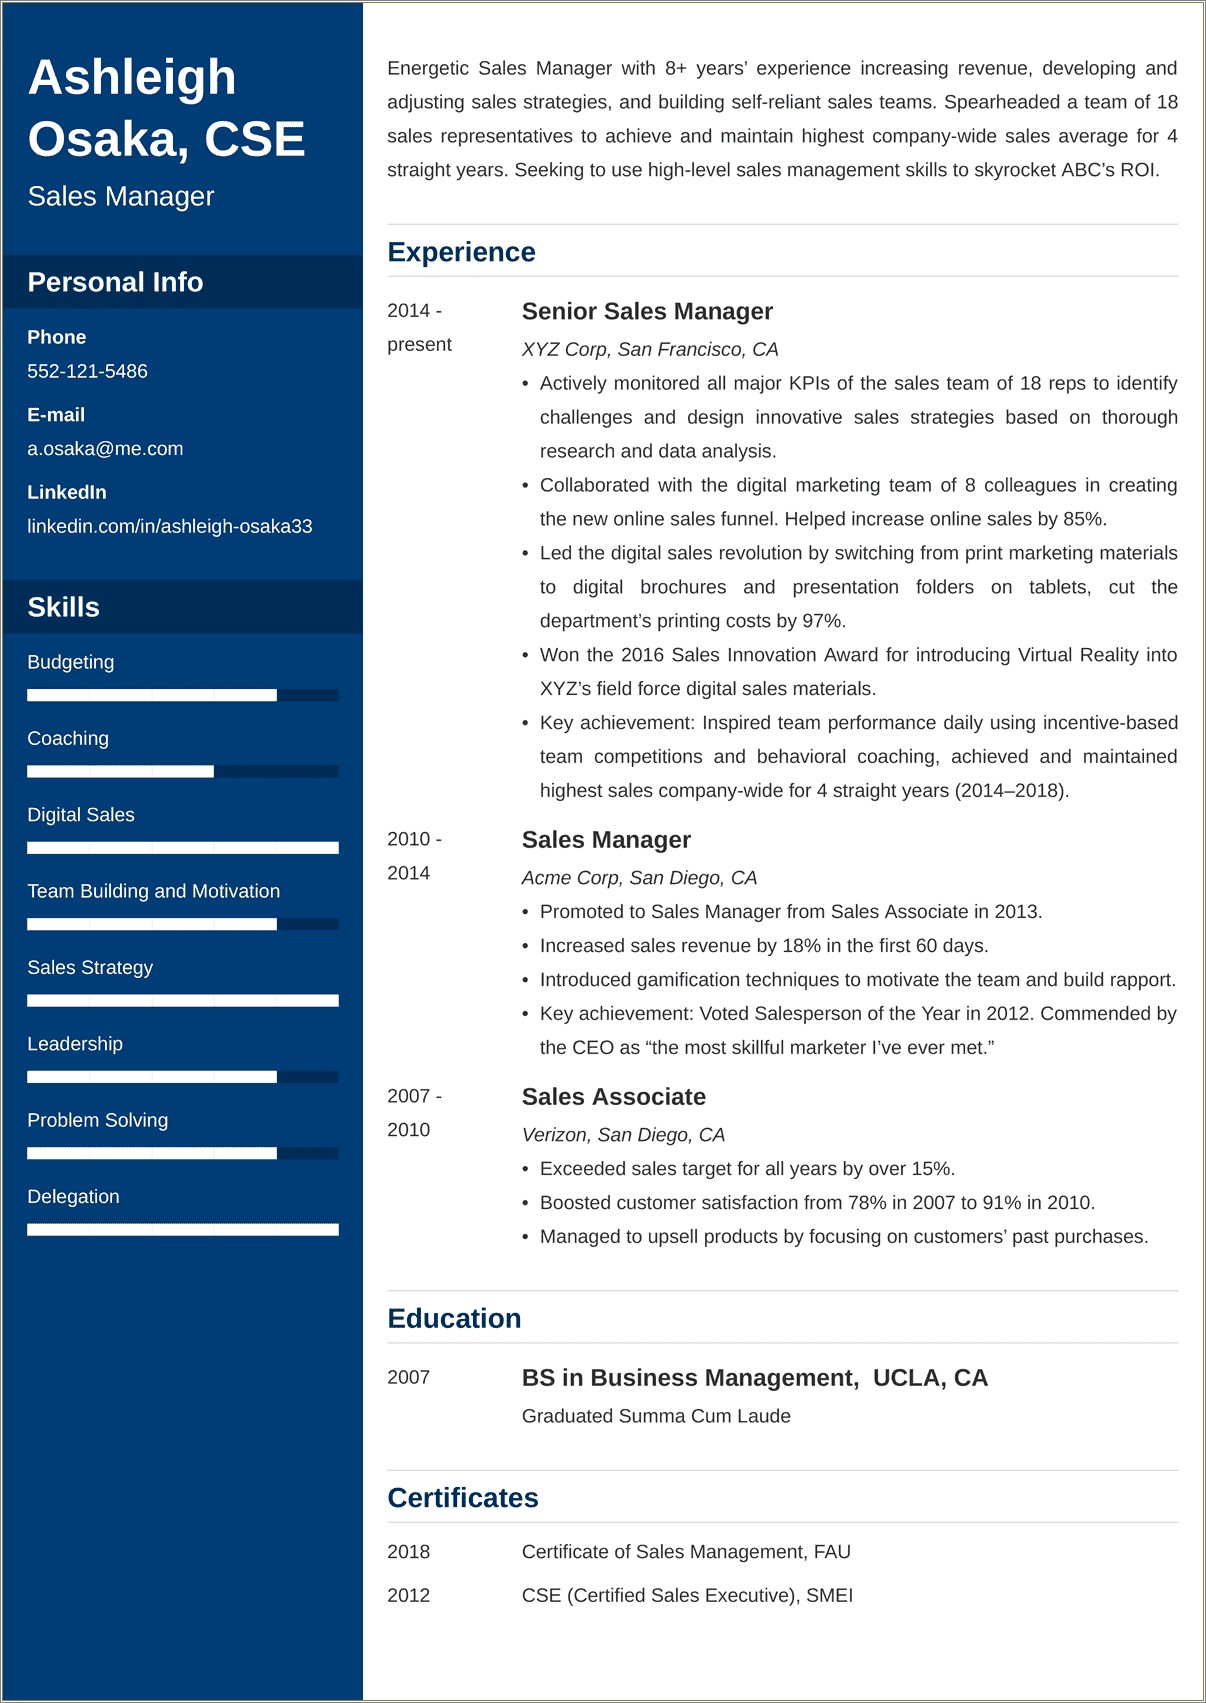 Resume For The Post Of Manager Administration